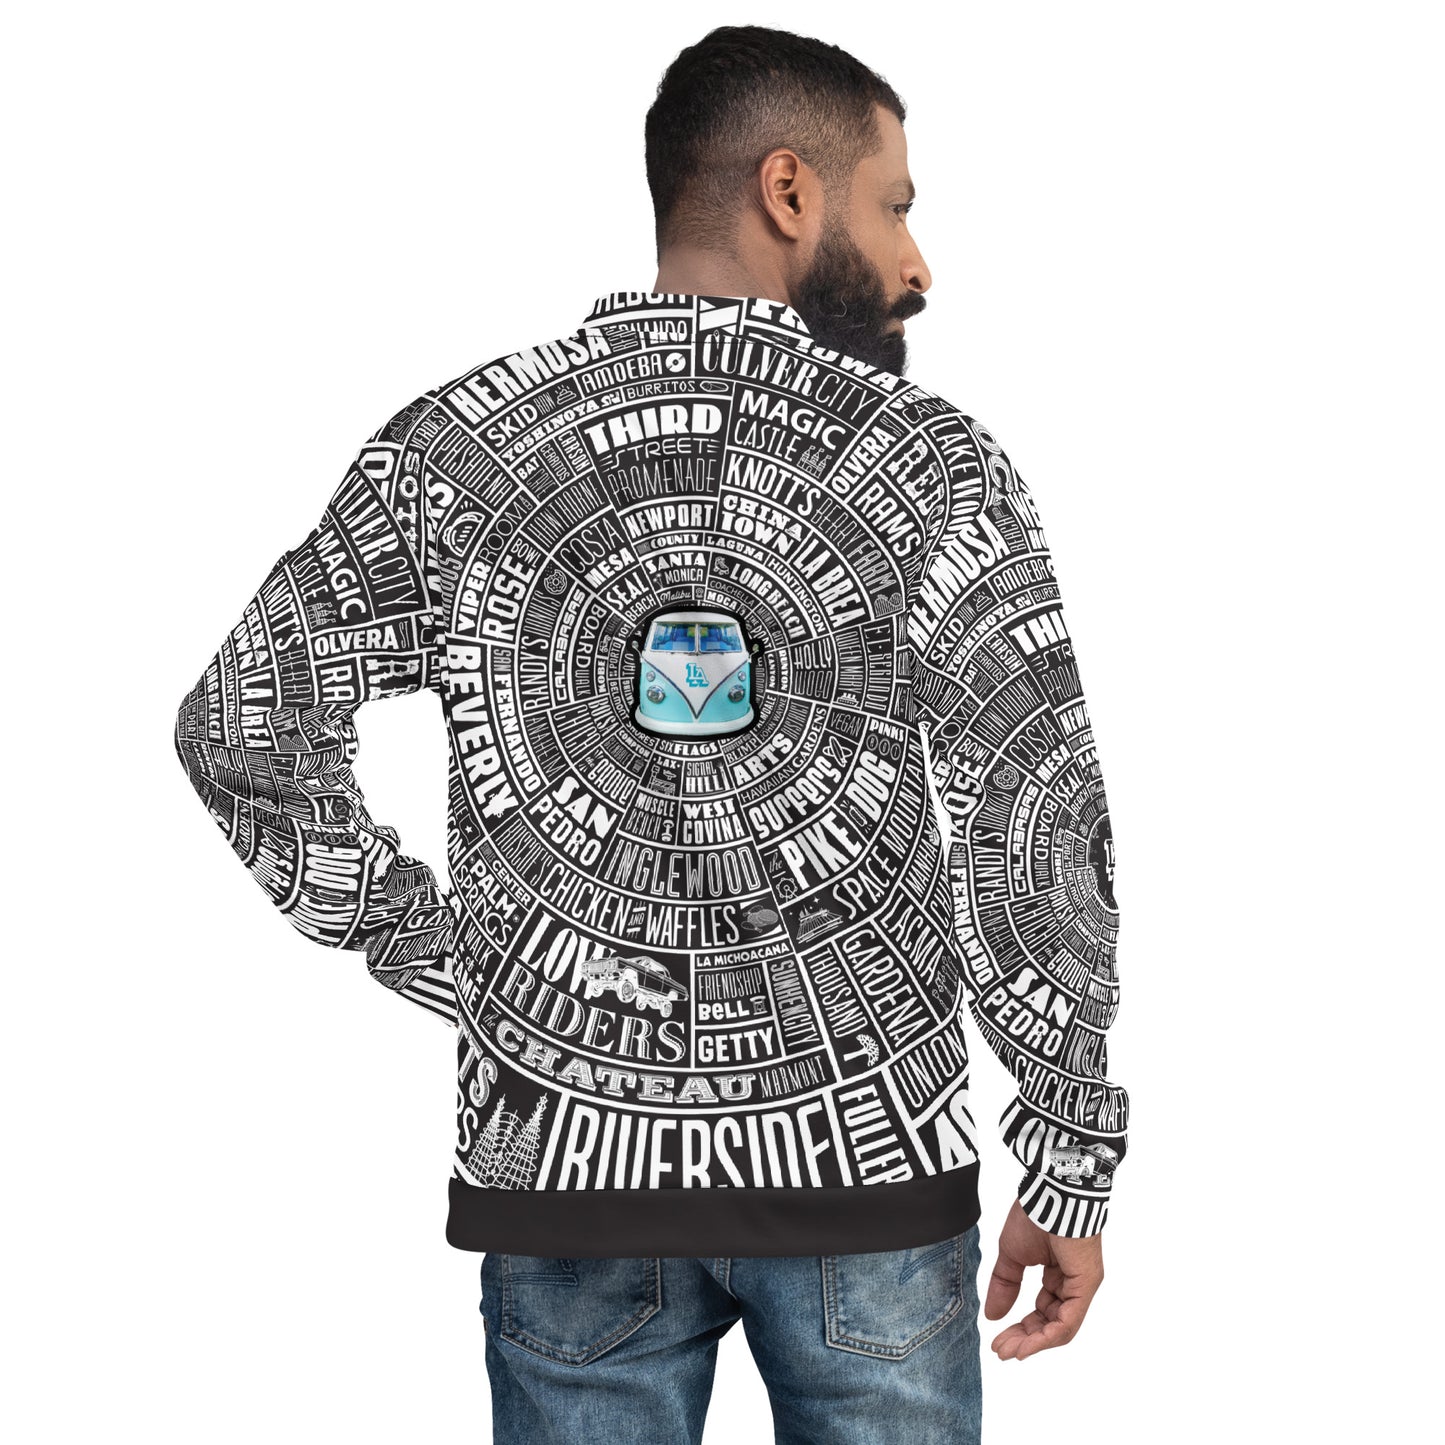 Los Angeles Type Wheel All Over Jacket